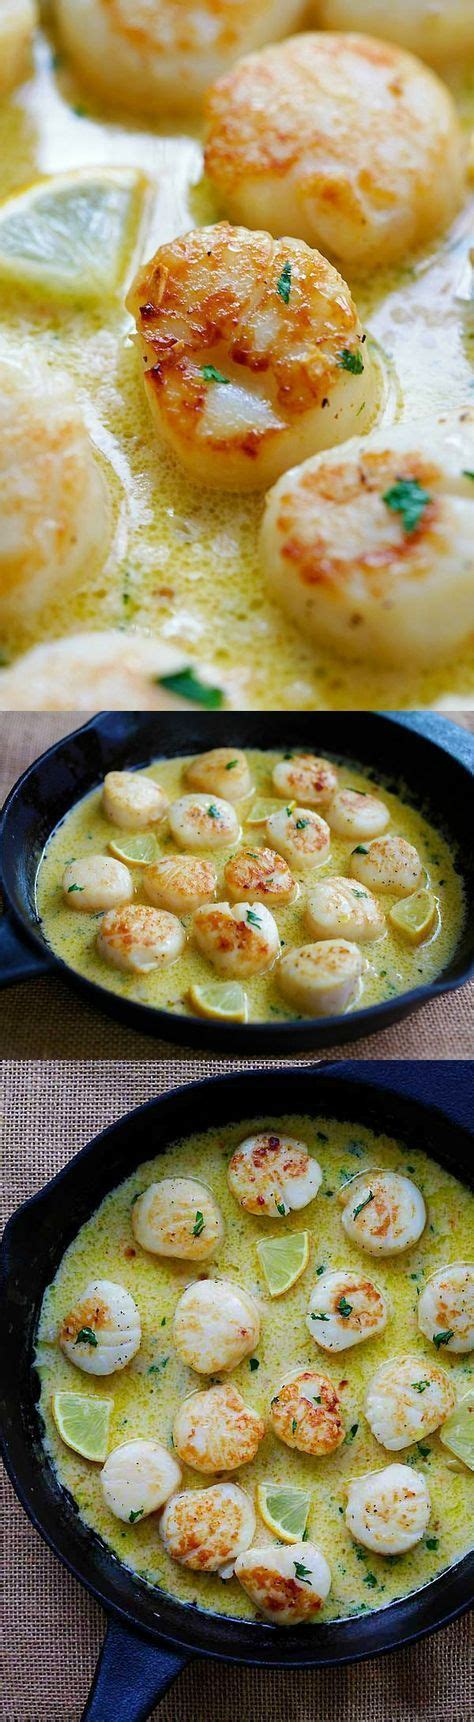 These low carb seared scallops and creamed spinach met all of the criteria in spades! Pin on Skillet & 1 Pot Dishes